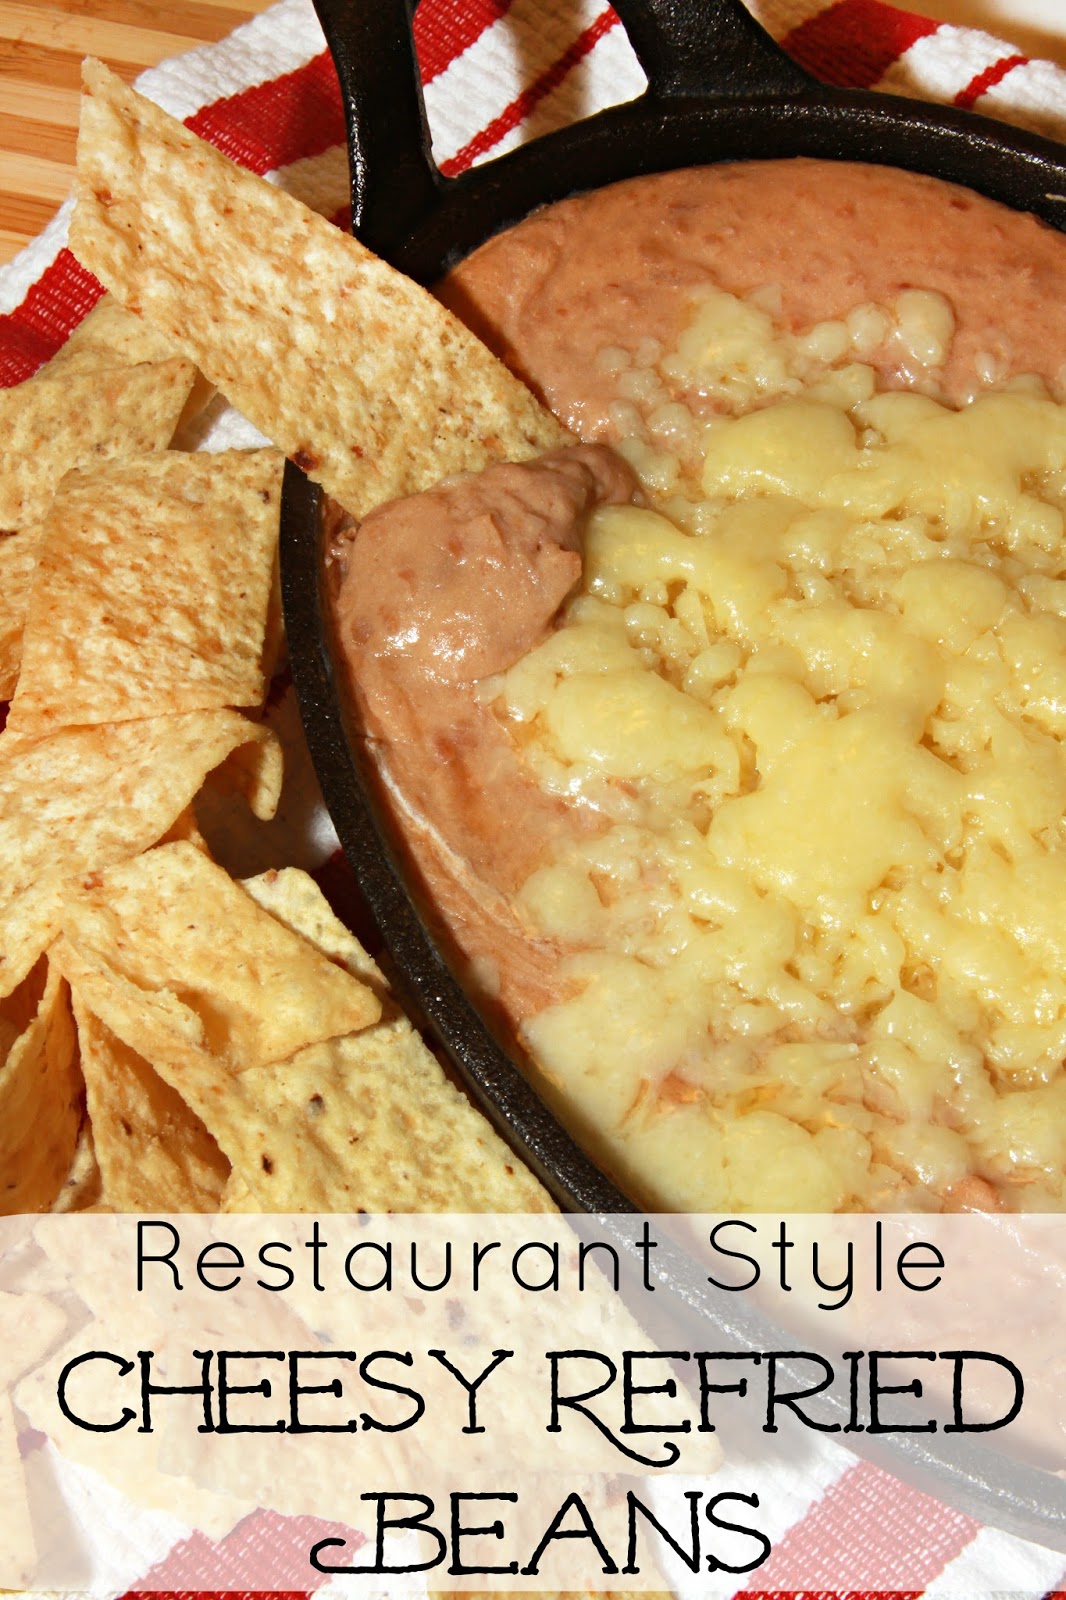 Restaurant Style Cheesy Refried Beans